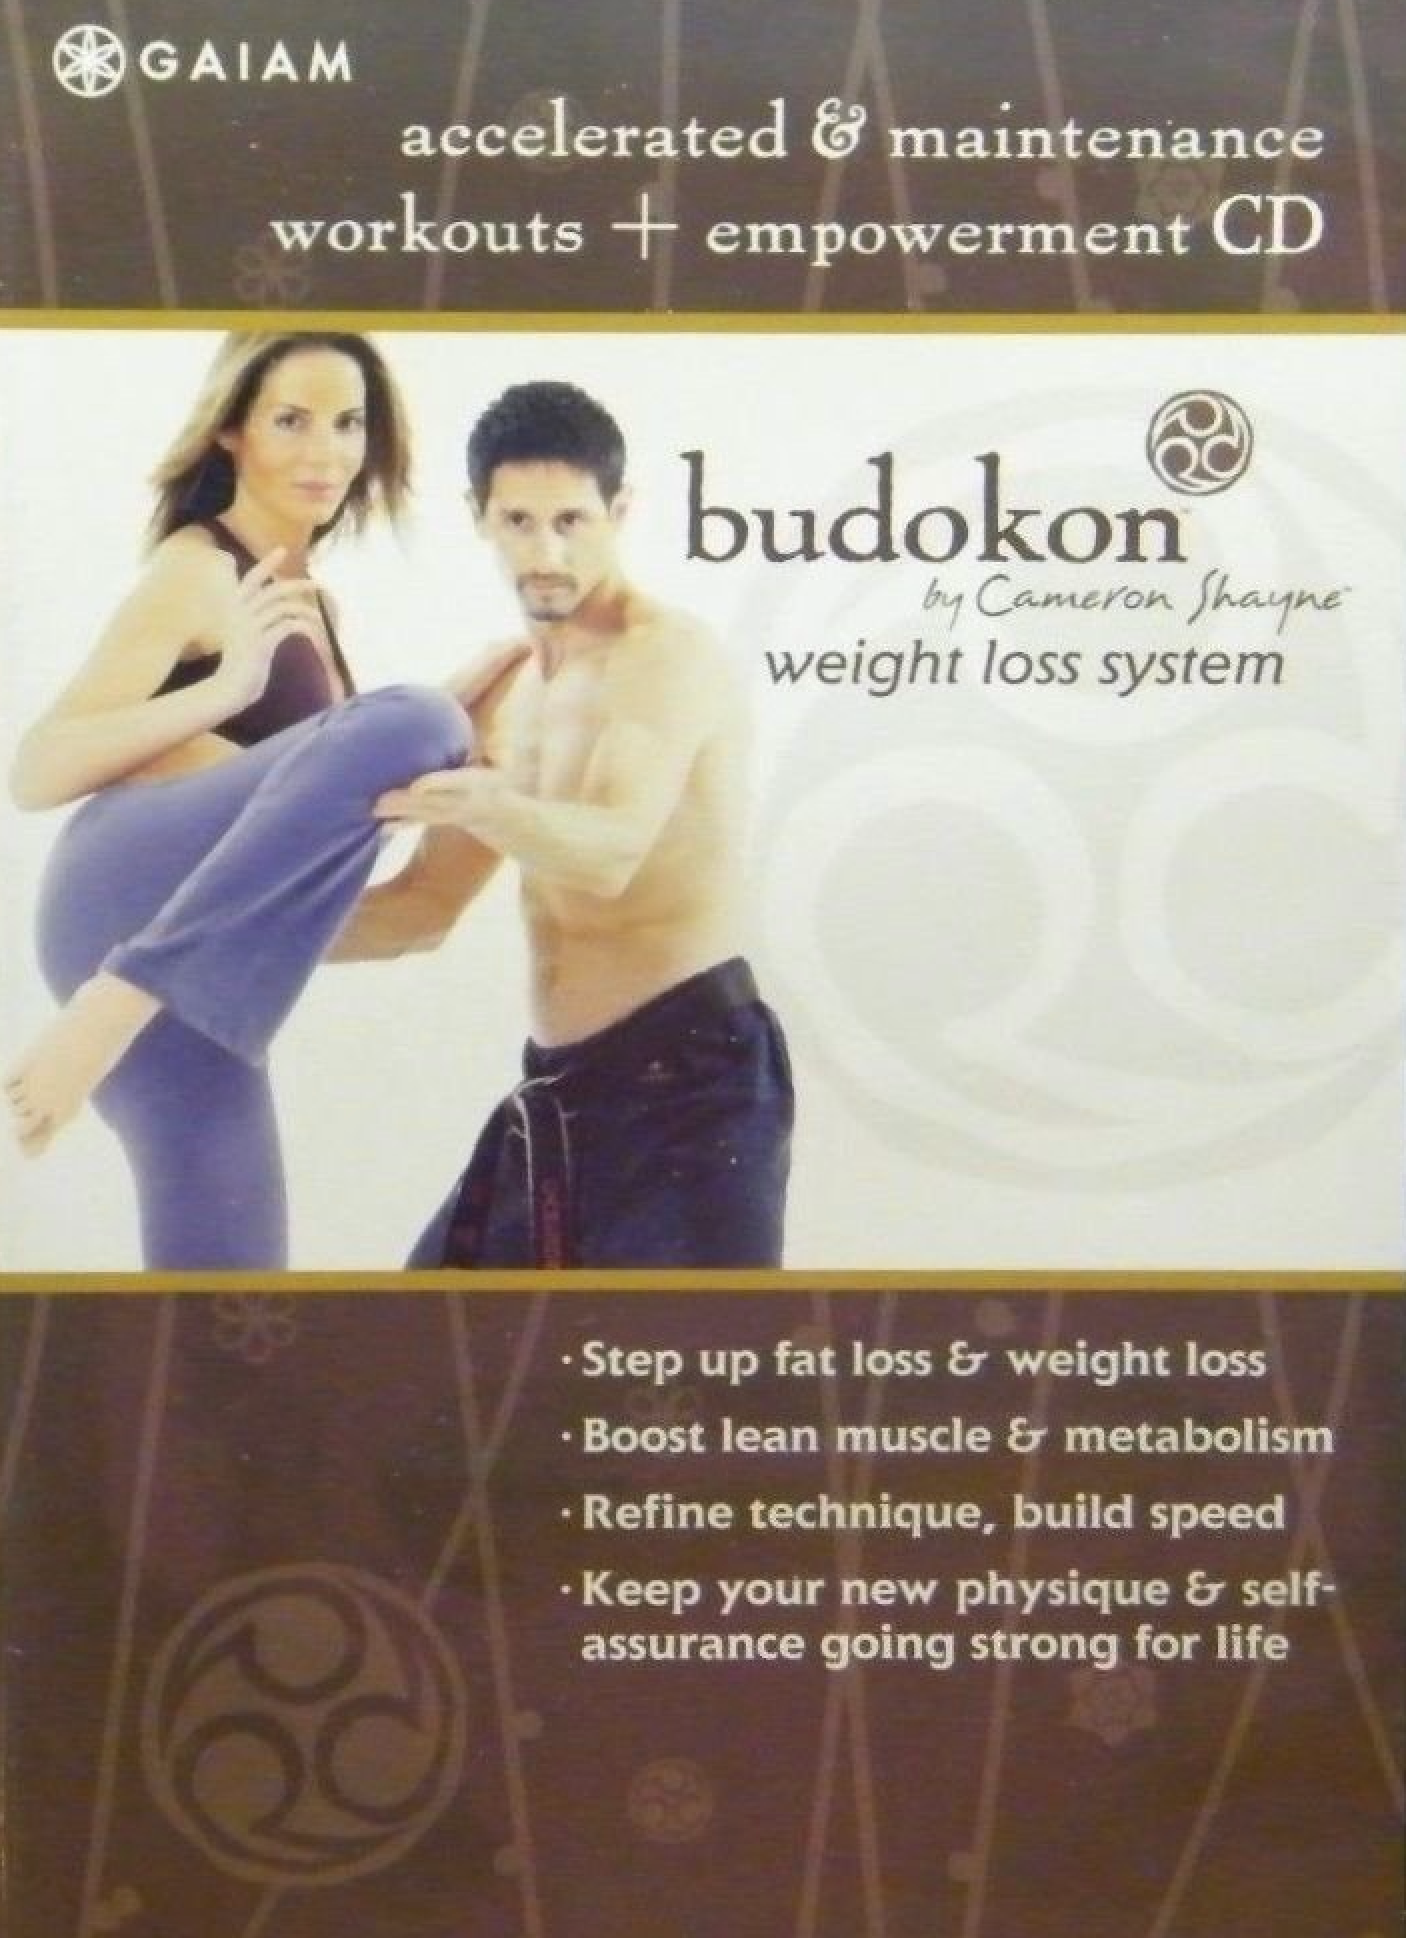 Budokon Weight Loss System: Accelerated & Maintenance Workouts + Empowerment CD by Cameron Shayne (Preowned)